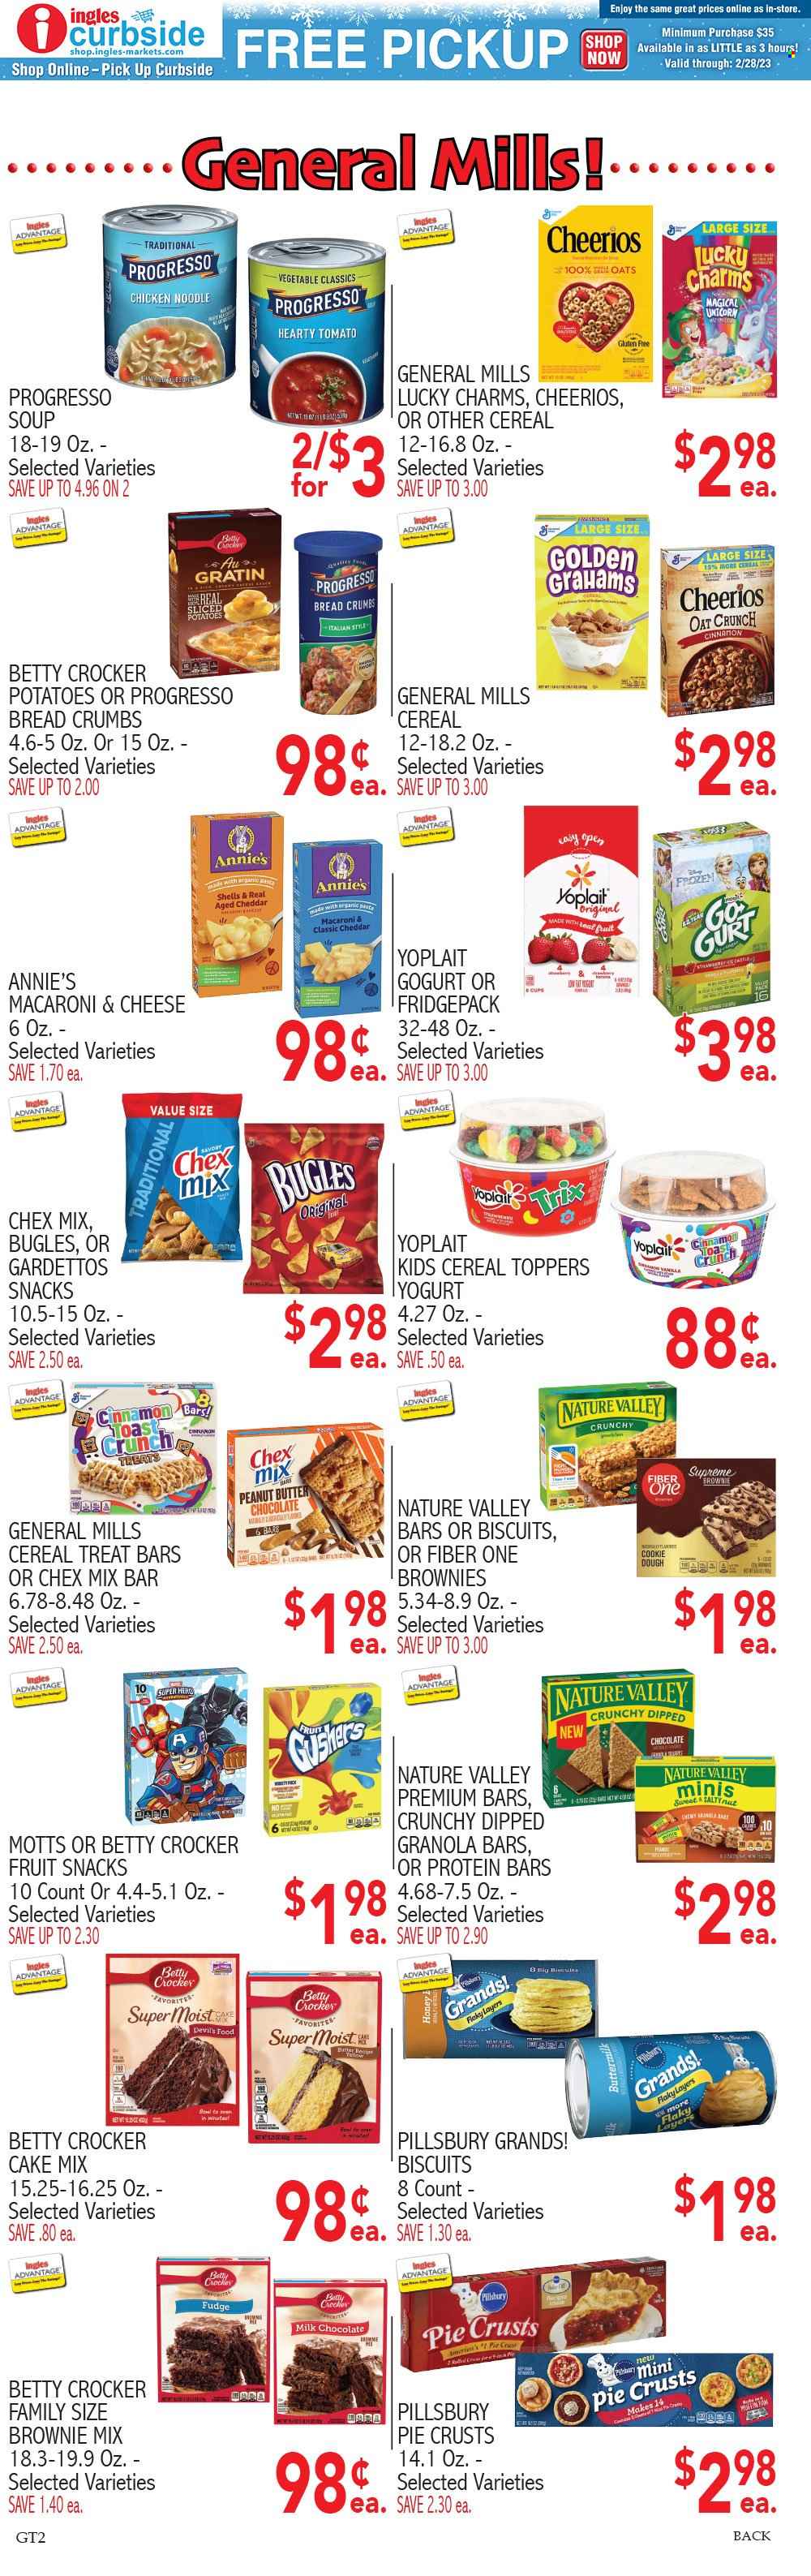 thumbnail - Ingles Flyer - 02/01/2023 - 02/07/2023 - Sales products - brownie mix, cake mix, potatoes, Mott's, macaroni & cheese, Pillsbury, noodles, Progresso, Annie's, yoghurt, Yoplait, cookie dough, fudge, milk chocolate, chocolate, biscuit, fruit snack, Chex Mix, pie crust, oats, cereals, Cheerios, protein bar, granola bar, Trix, Nature Valley, Fiber One, cinnamon, peanut butter, Castle, pan, cup, bowl. Page 5.